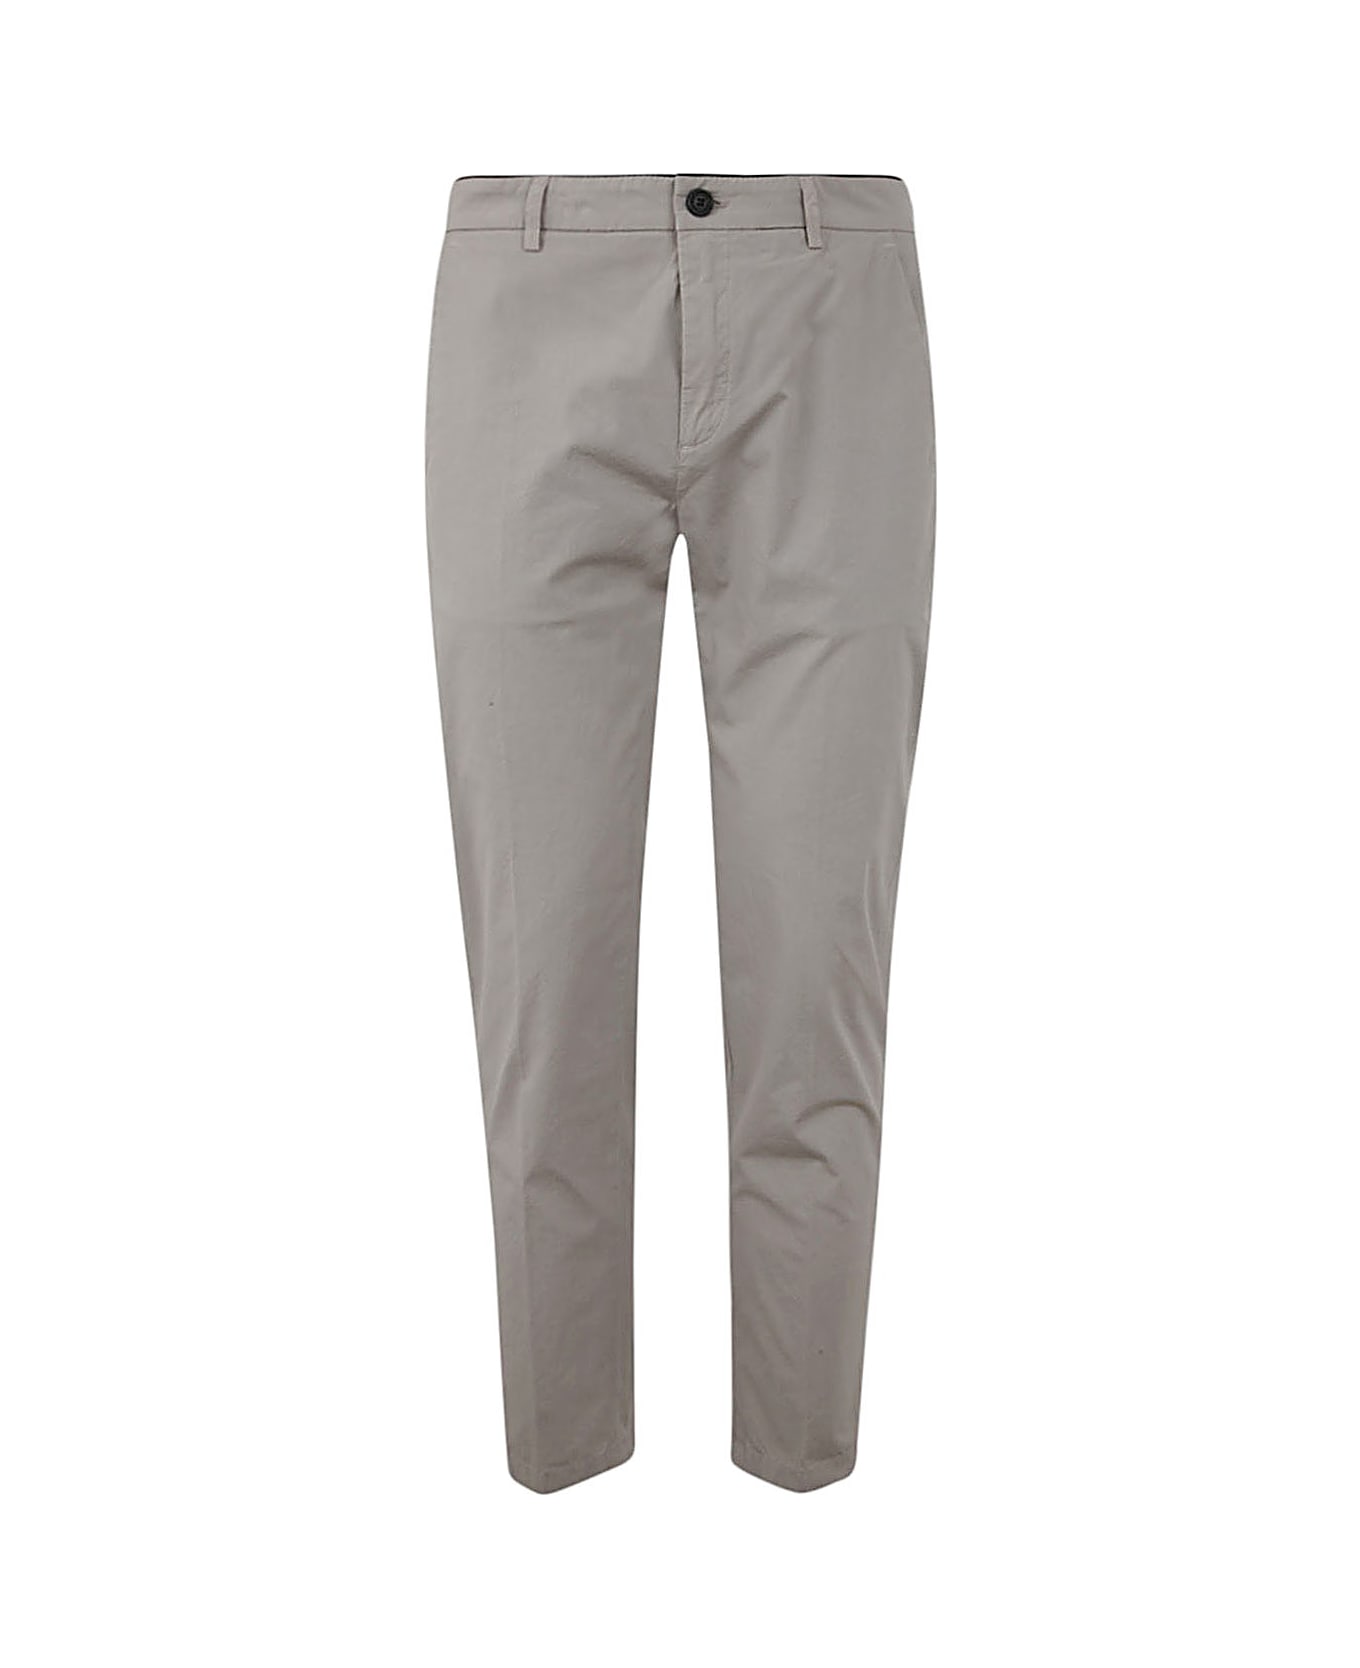 Department Five Prince Crop Chino Trousers - Stucco